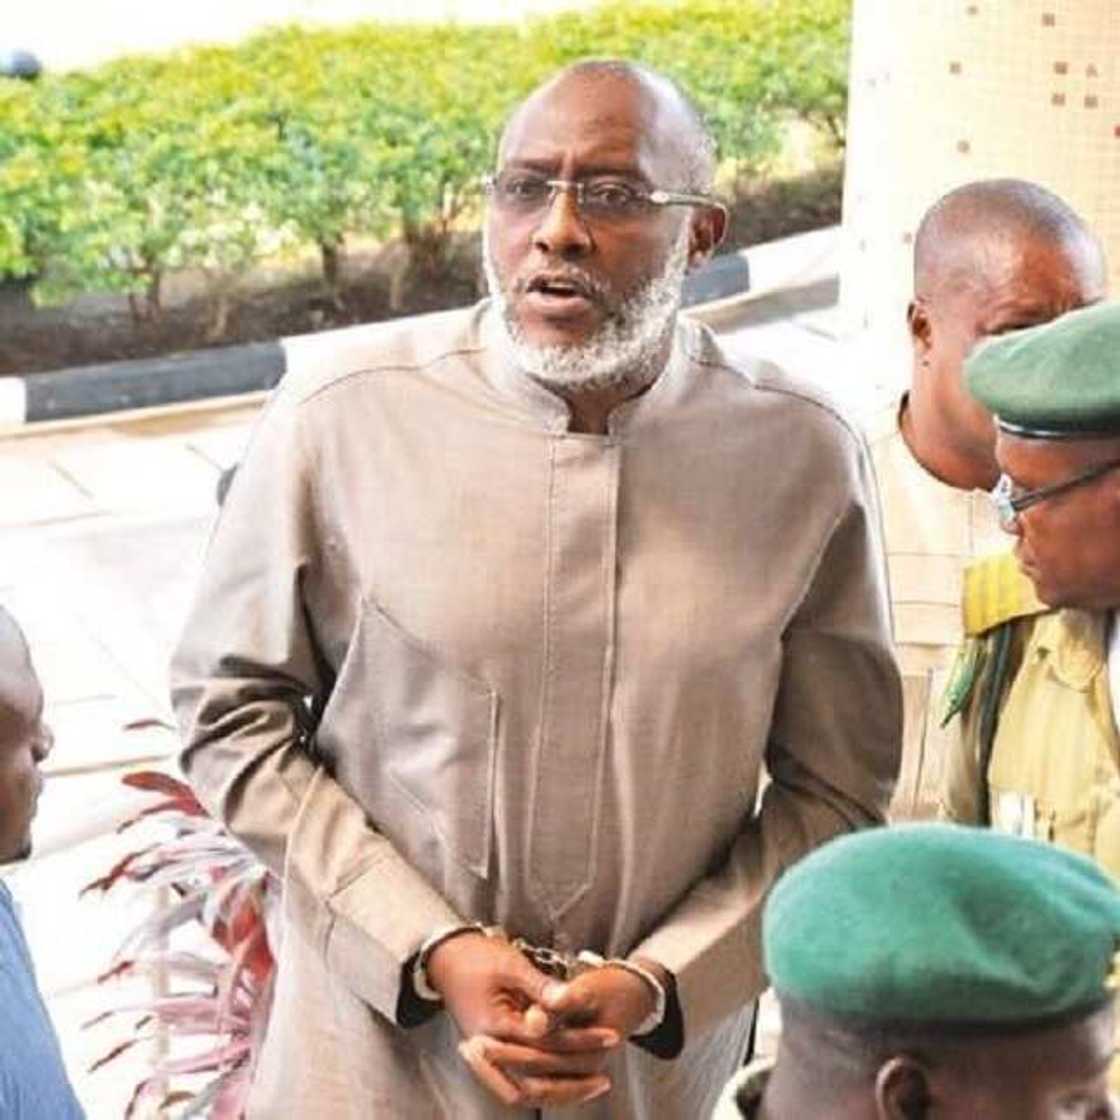 APC has nothing to offer but PDP remains a viable option for Nigeria’s unity, says Olisa Metuh